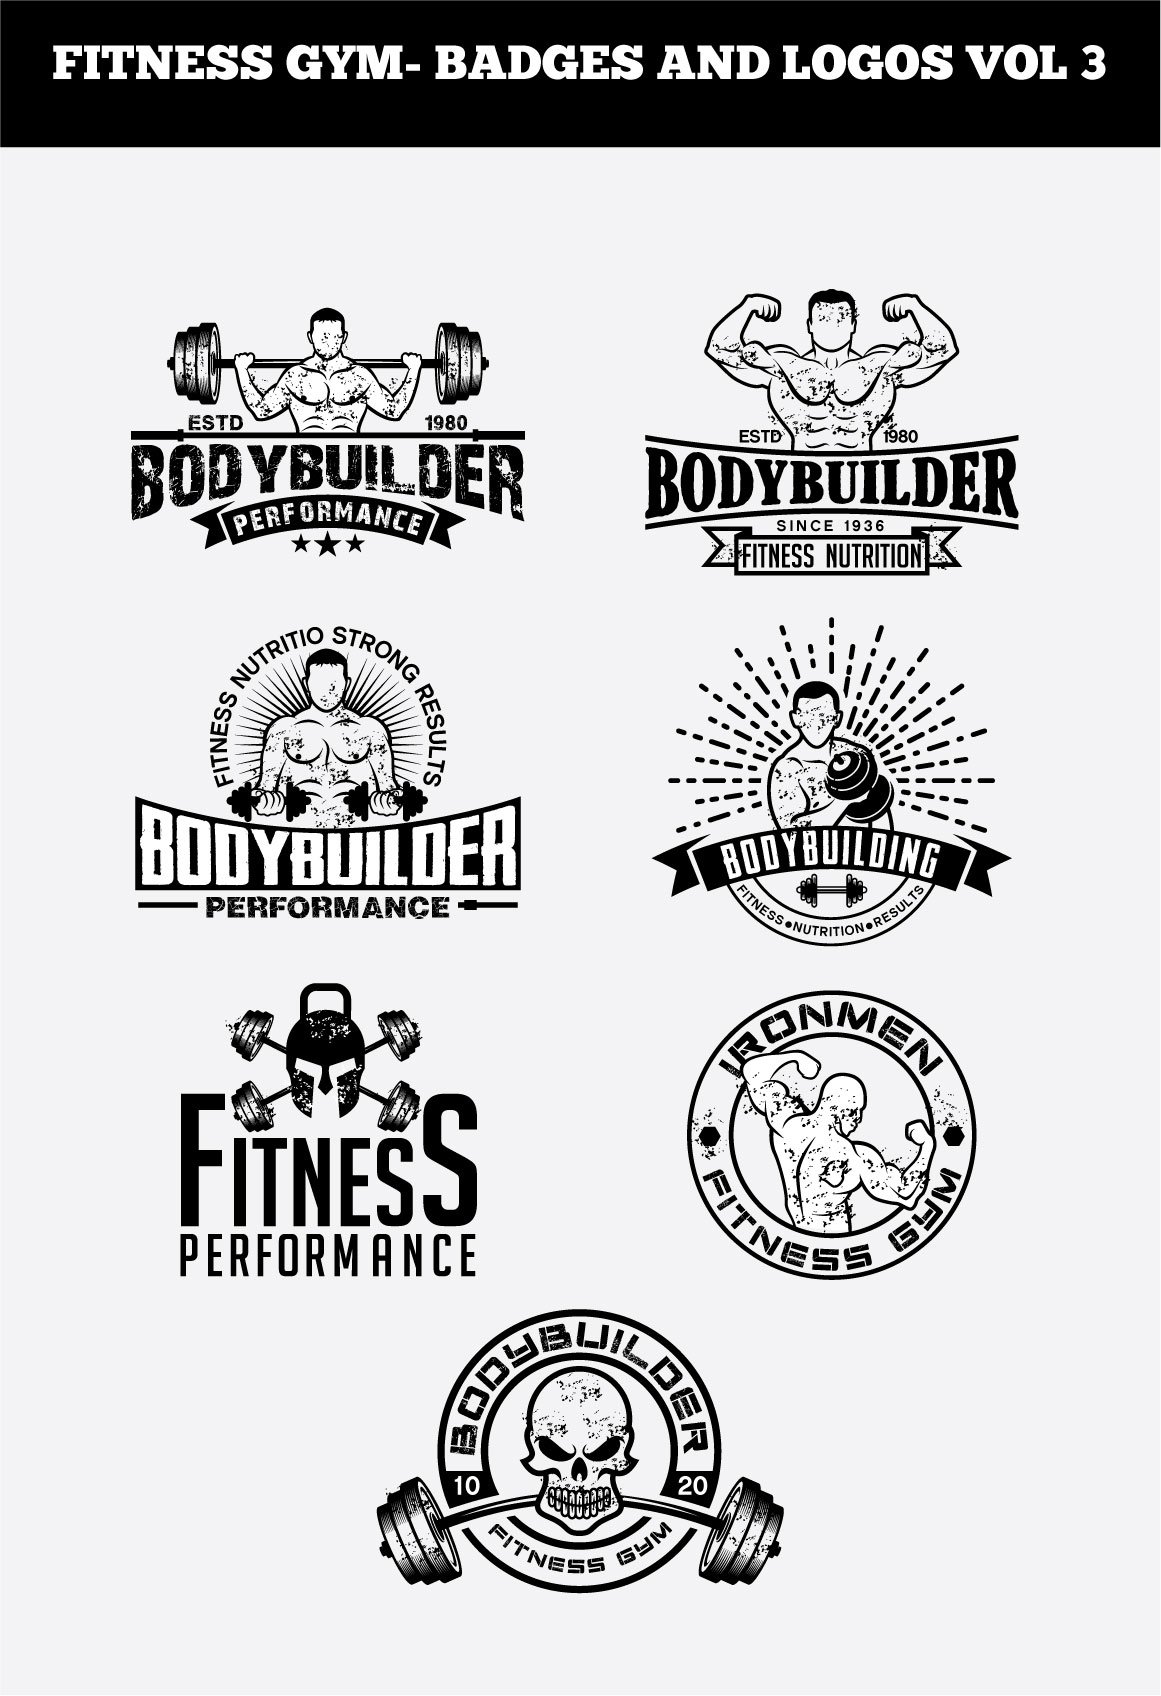 FITNESS GYM- BADGES AND LOGOS VOL3 cover image.